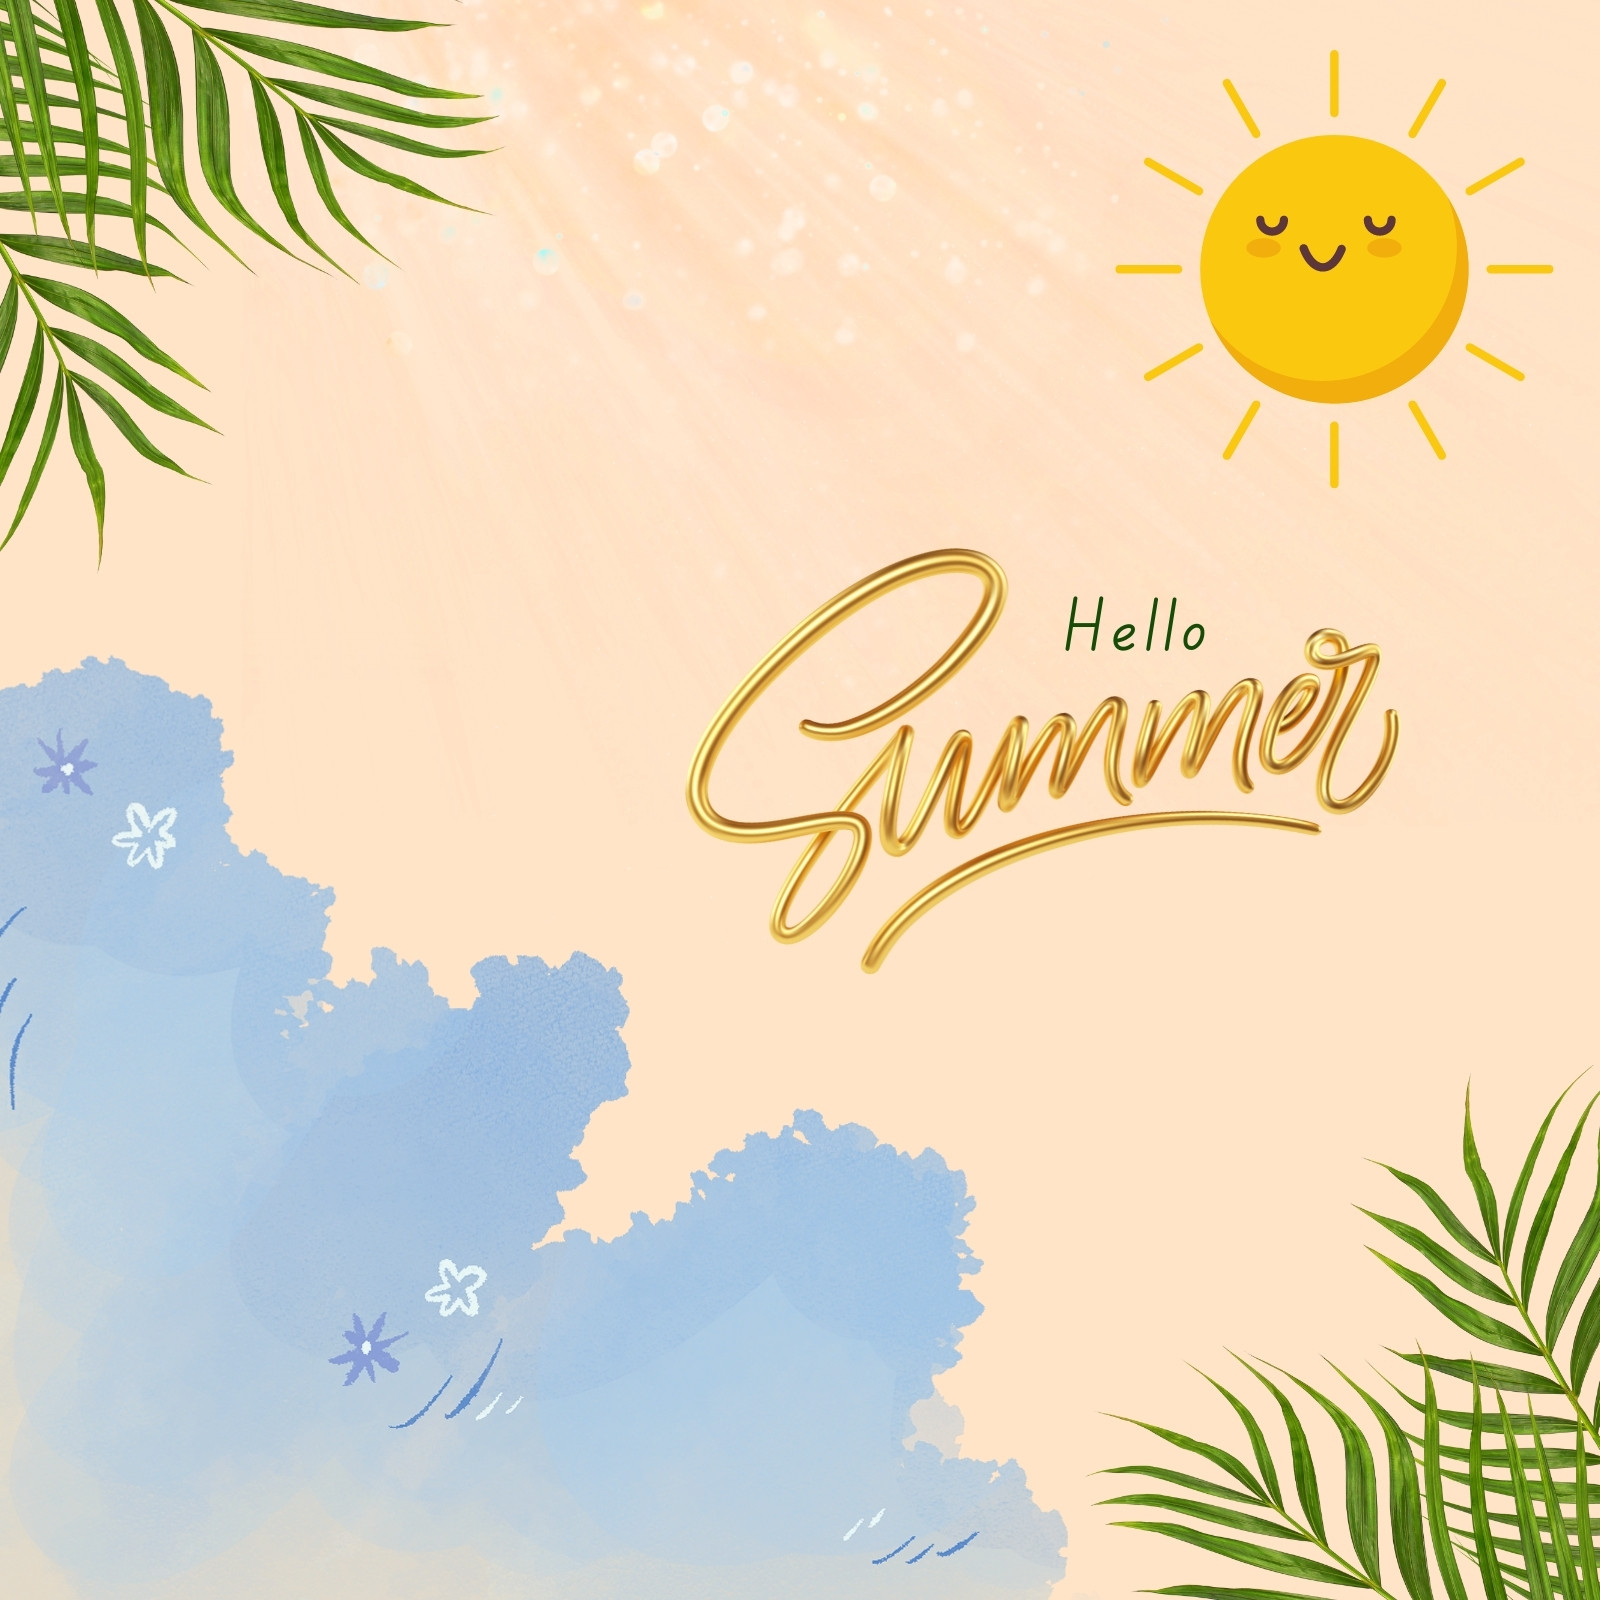 Summer Vibes Pink Poster Aesthetic Background, Hello Summer, Hot Summer,  Aesthetic Background Image And Wallpaper for Free Download